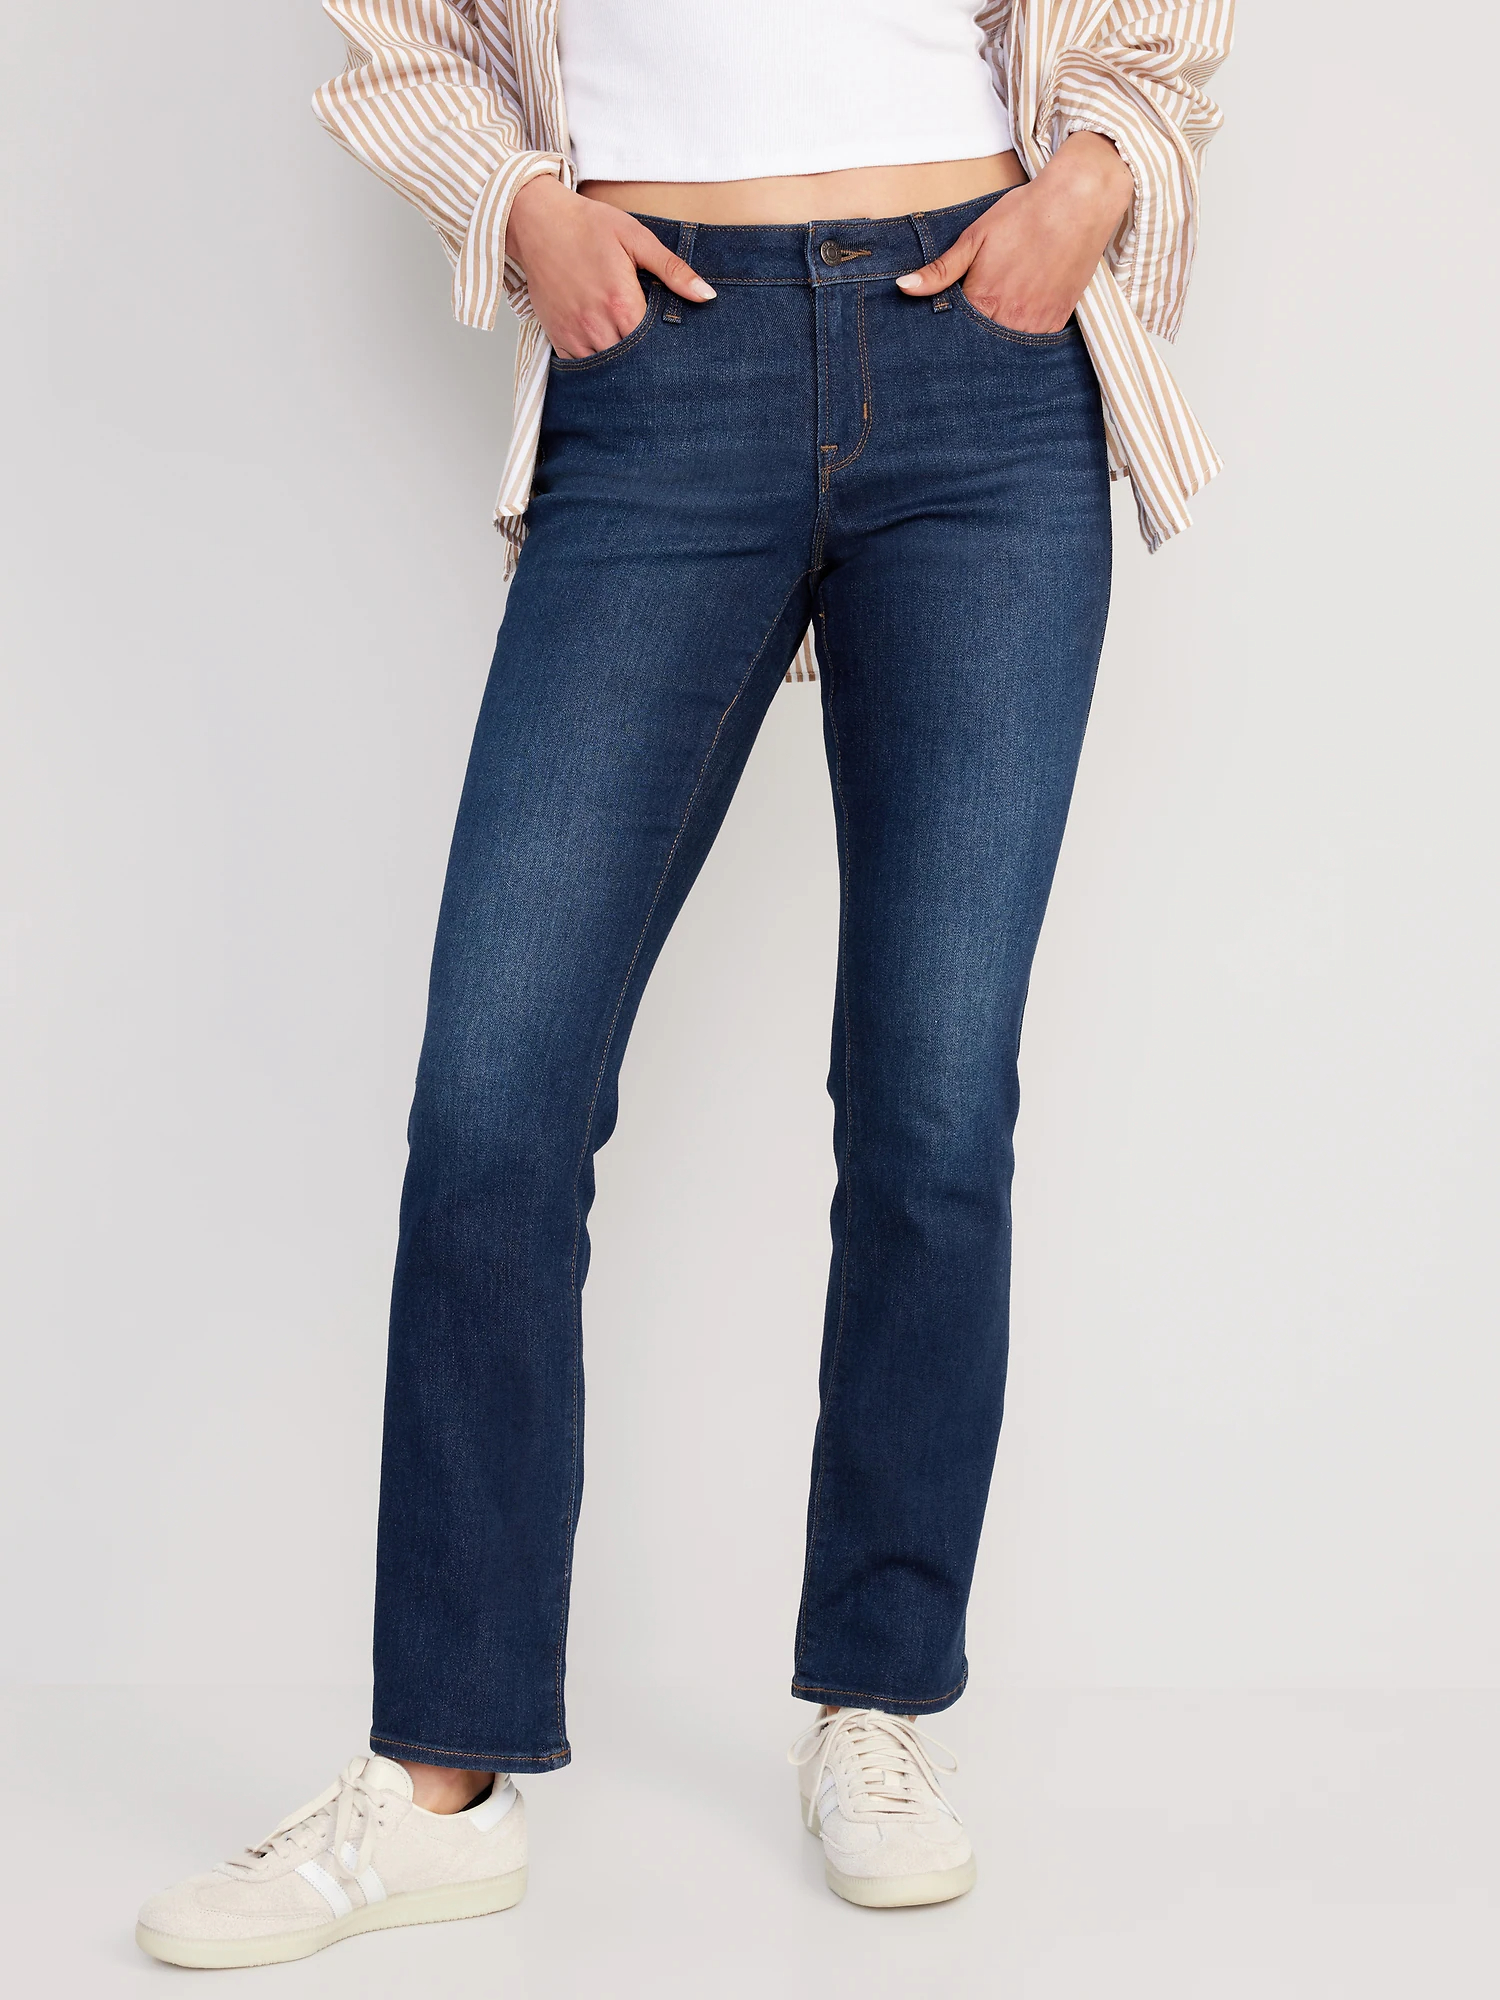 Old navy boot cut jeans : For Timeless Appeal”缩略图